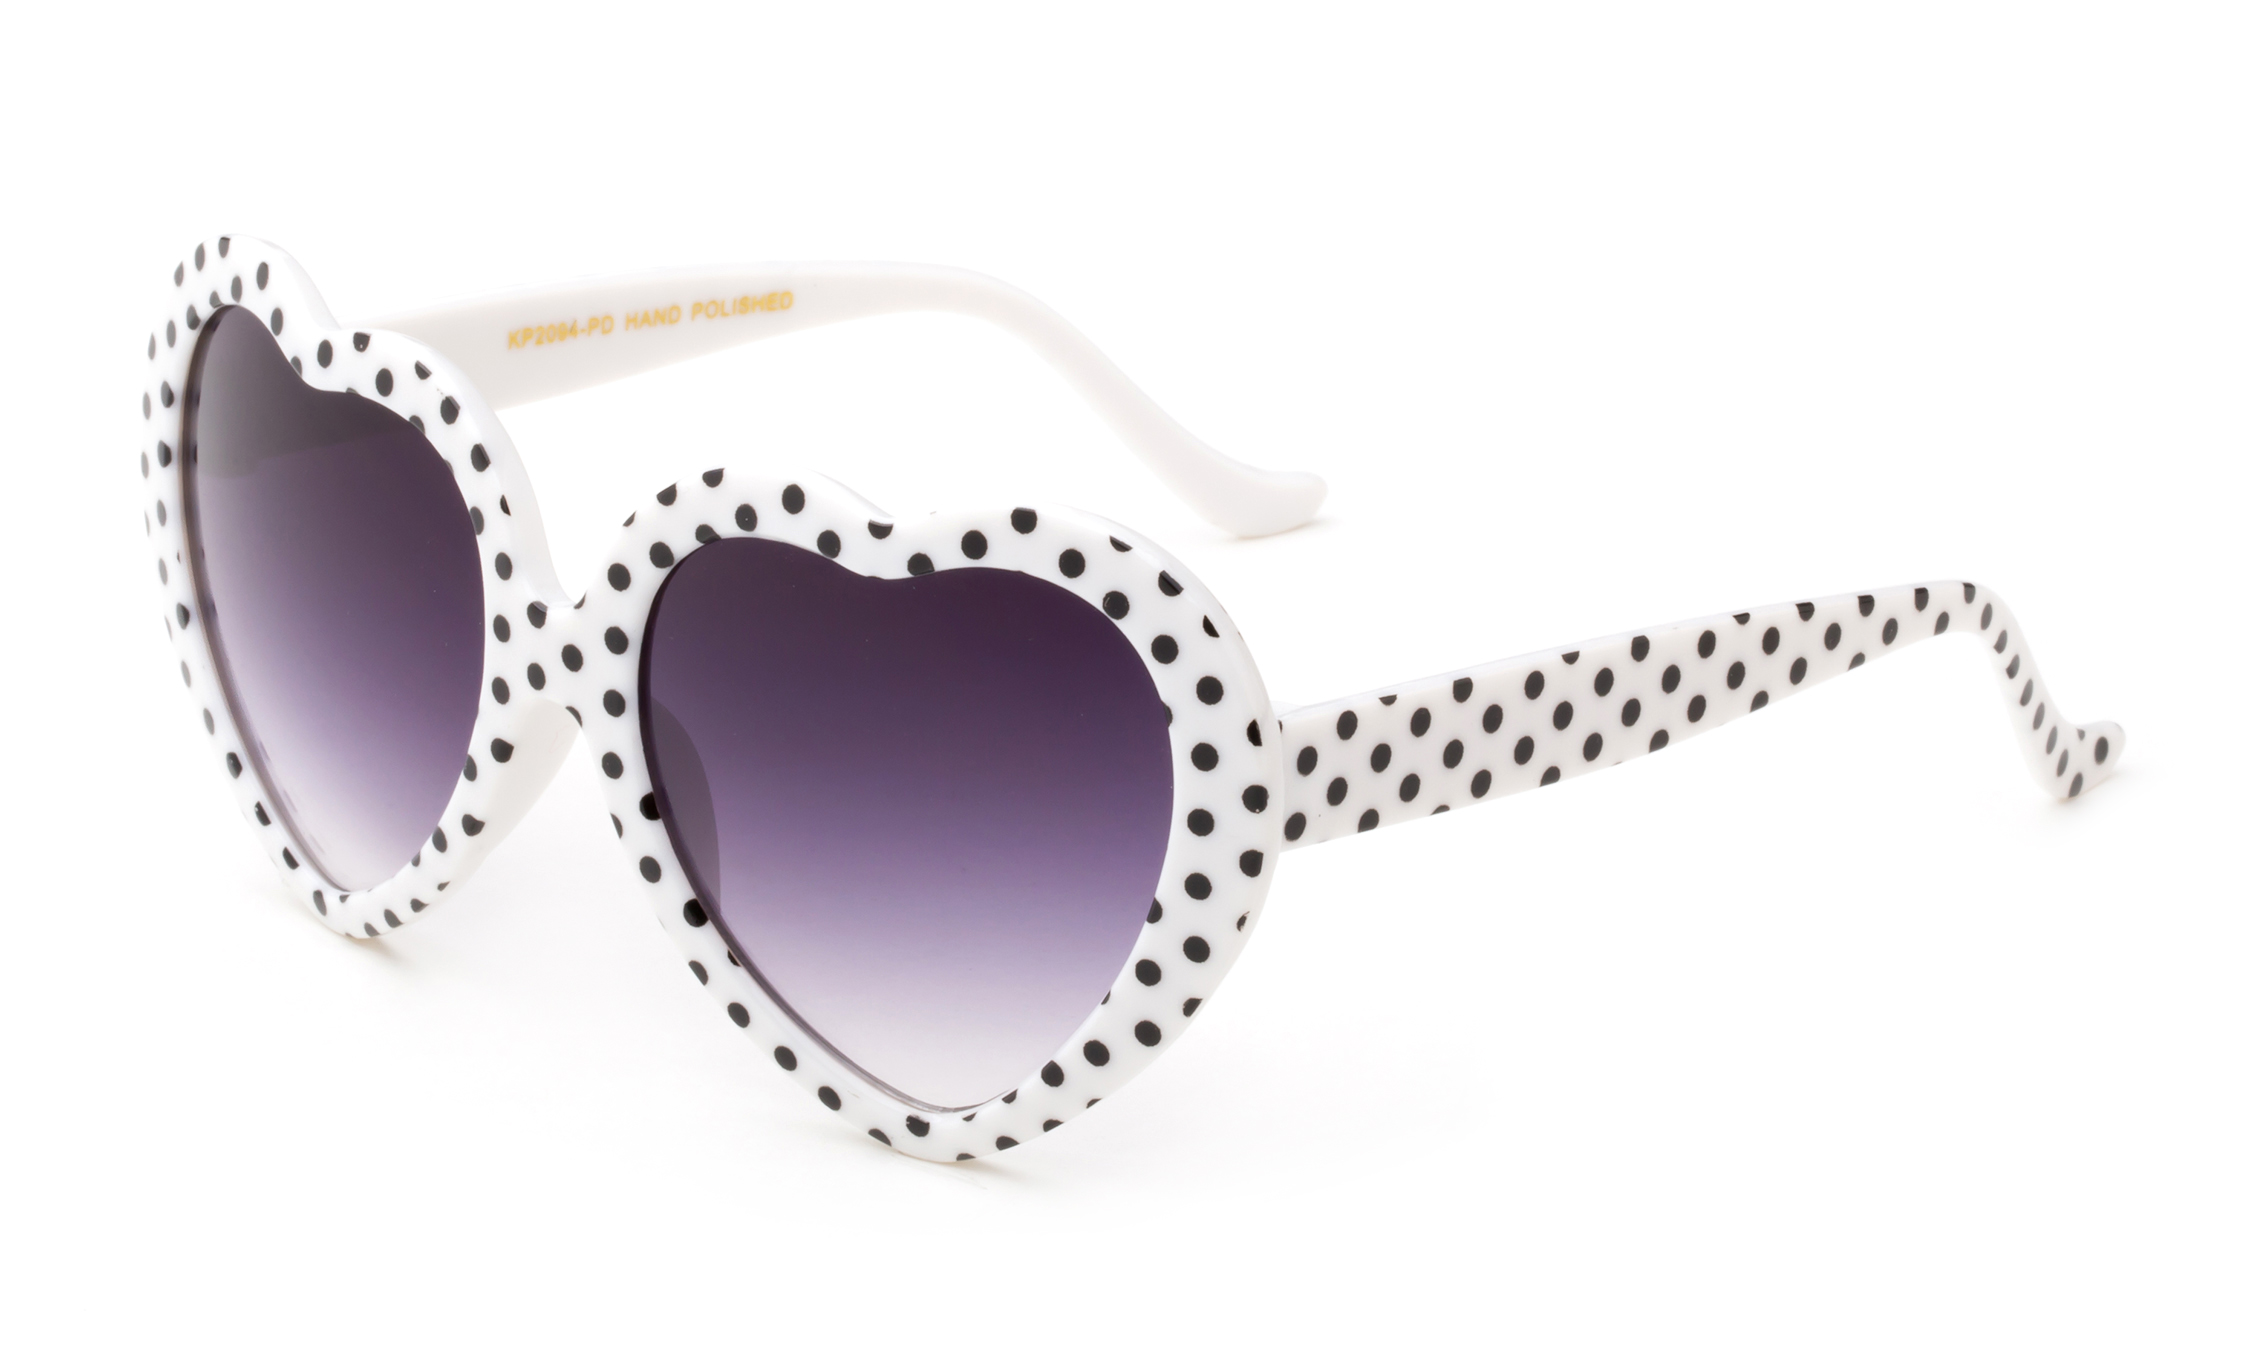 Newbee Fashion-Kids Heart Sunglasses Girls Heart Shaped Sunglasses Polka Dots Cute Vintage Look UV Protection w/Carrying Pouch - image 2 of 3